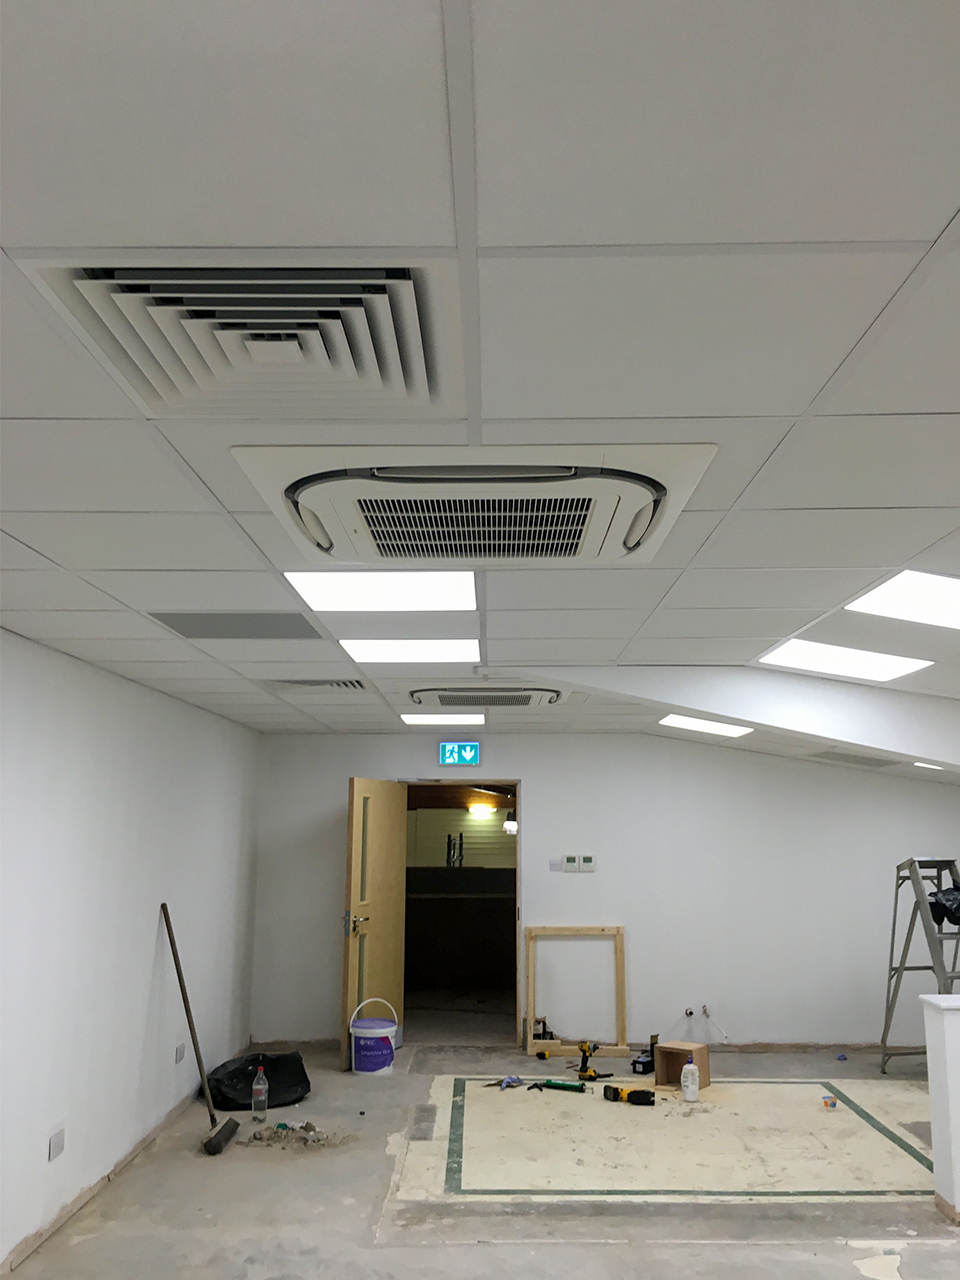 suspended ceiling and ceiling air conditioning installations at commercial offices.